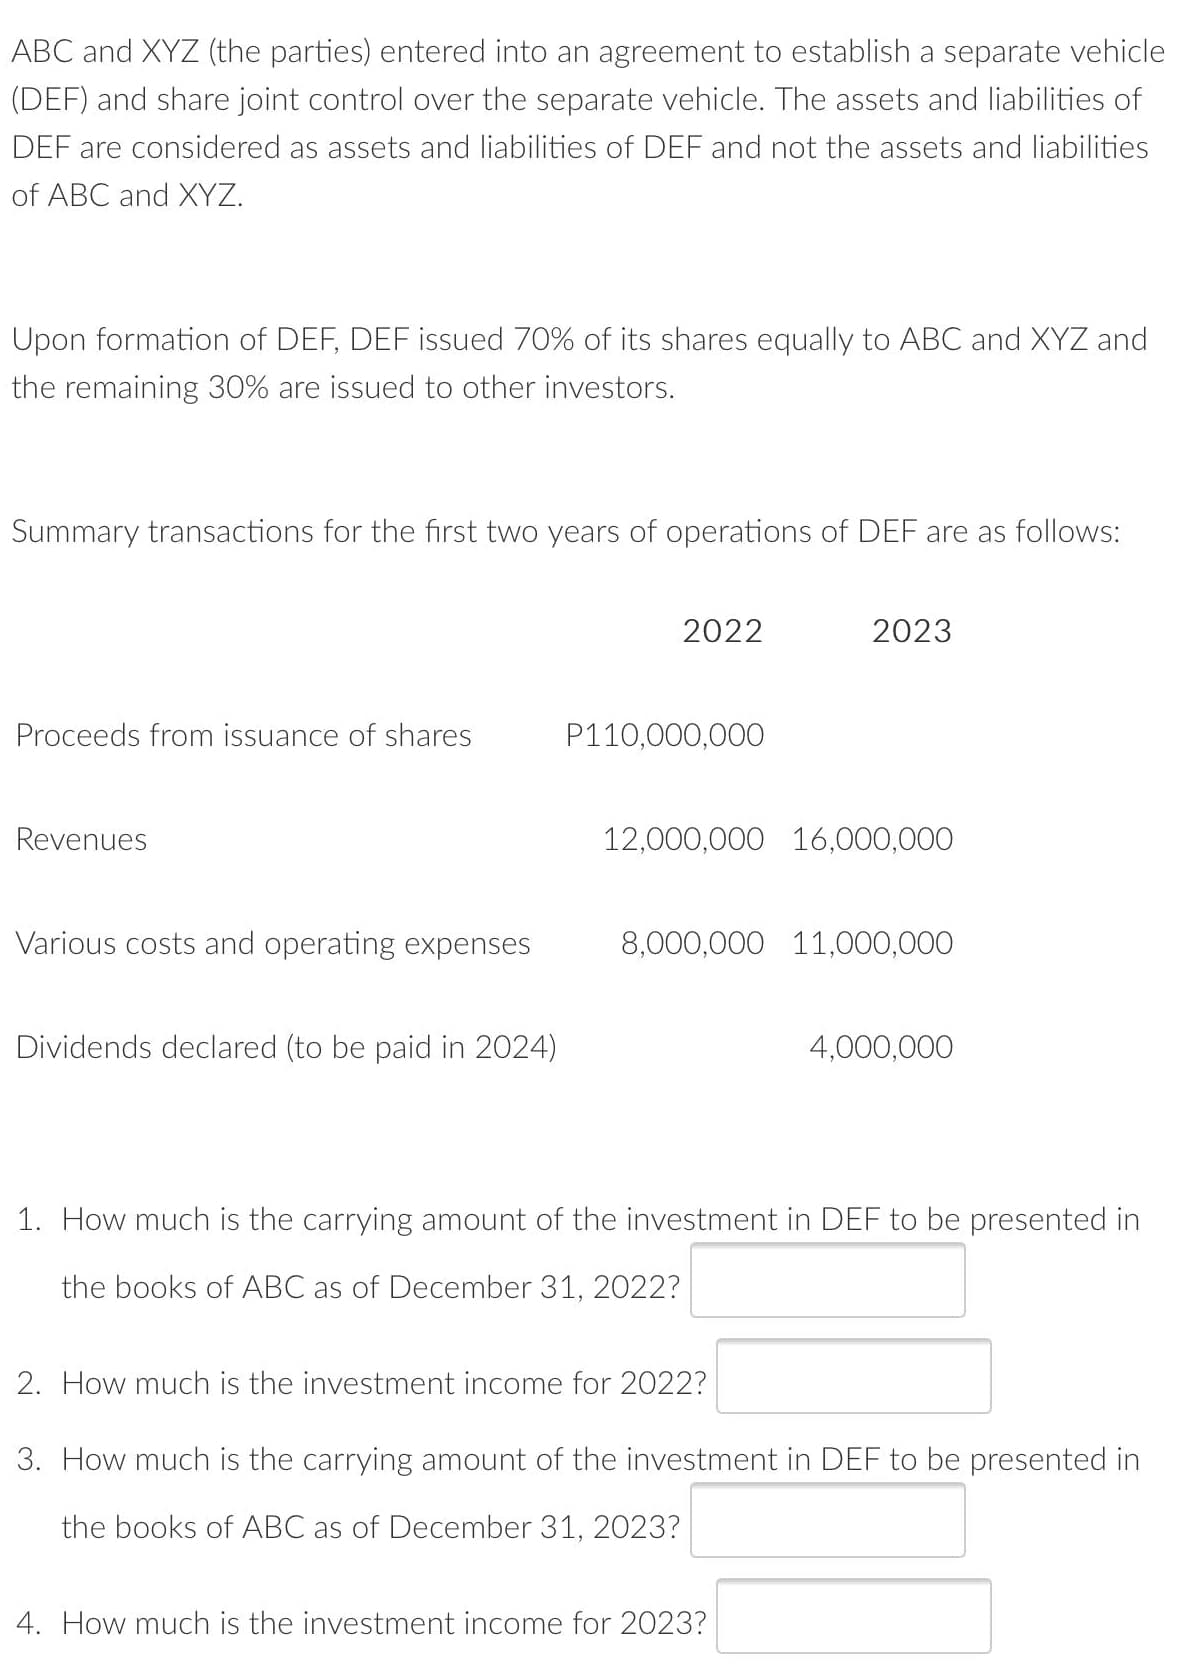 ABC and XYZ (the parties) entered into an agreement to establish a separate vehicle
(DEF) and share joint control over the separate vehicle. The assets and liabilities of
DEF are considered as assets and liabilities of DEF and not the assets and liabilities
of ABC and XYZ.
Upon formation of DEF, DEF issued 70% of its shares equally to ABC and XYZ and
the remaining 30% are issued to other investors.
Summary transactions for the first two years of operations of DEF are as follows:
2022
2023
Proceeds from issuance of shares
P110,000,000
Revenues
12,000,000 16,000,000
Various costs and operating expenses
8,000,000 11,000,000
Dividends declared (to be paid in 2024)
4,000,000
1. How much is the carrying amount of the investment in DEF to be presented in
the books of ABC as of December 31, 2022?
2. How much is the investment income for 2022?
3. How much is the carrying amount of the investment in DEF to be presented in
the books of ABC as of December 31, 2023?
4. How much is the investment income for 2023?
